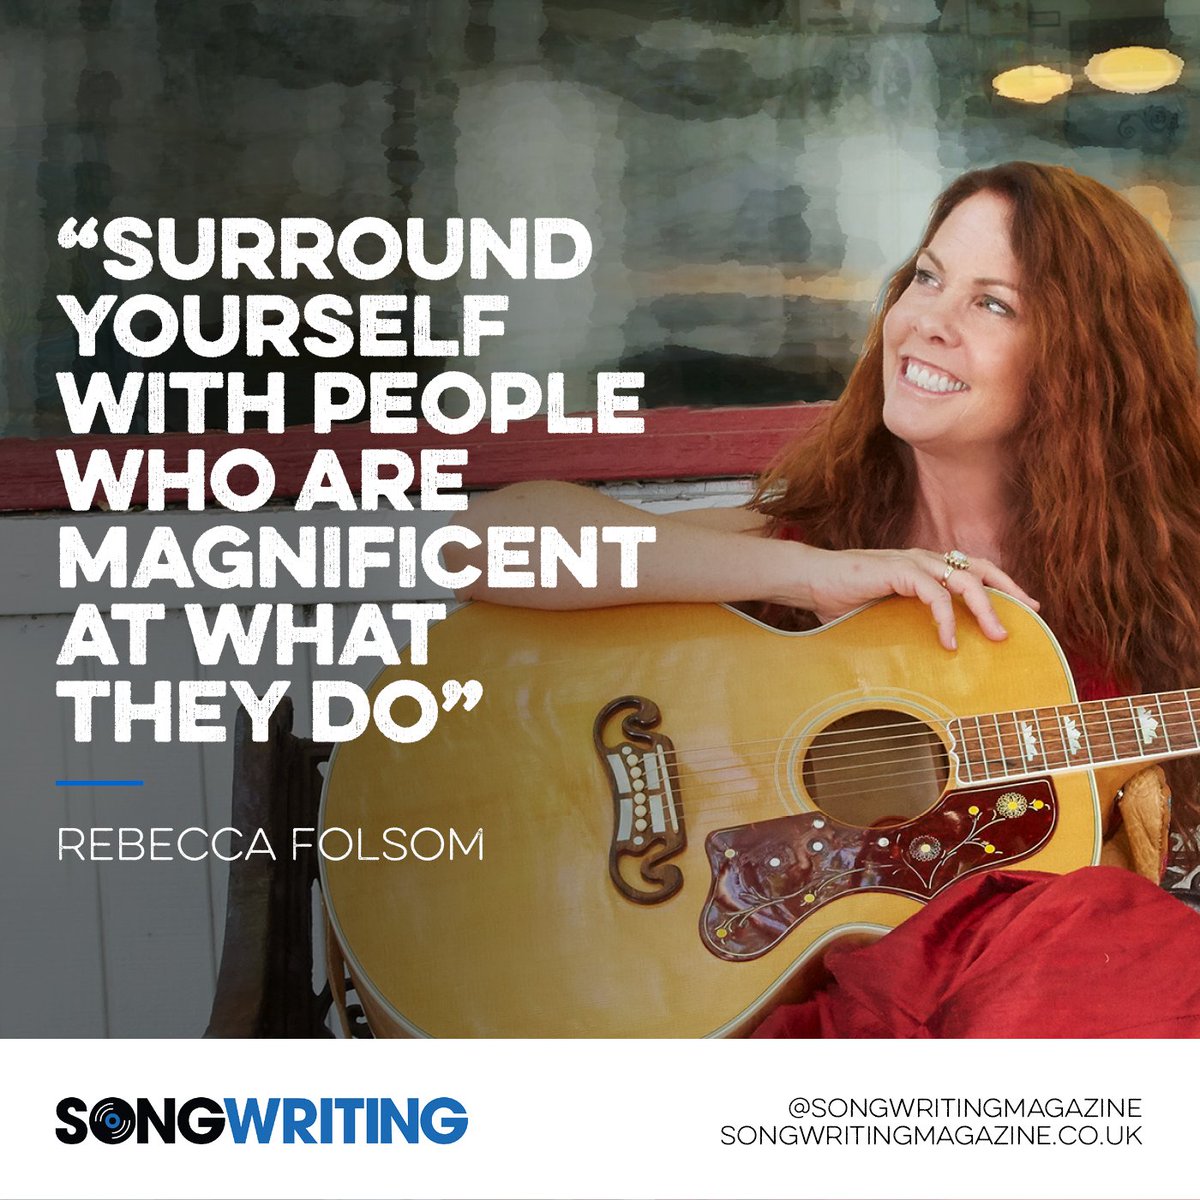 'Surround yourself with people who are magnificent at what they do' — @RebeccaFolsom8 

The critically acclaimed singer-songwriter provides 7 trim tab moves to rocket boost your songwriting career, in our new issue... steadyhq.com/en/songwriting…

#songwritingtips #rebeccafolsom